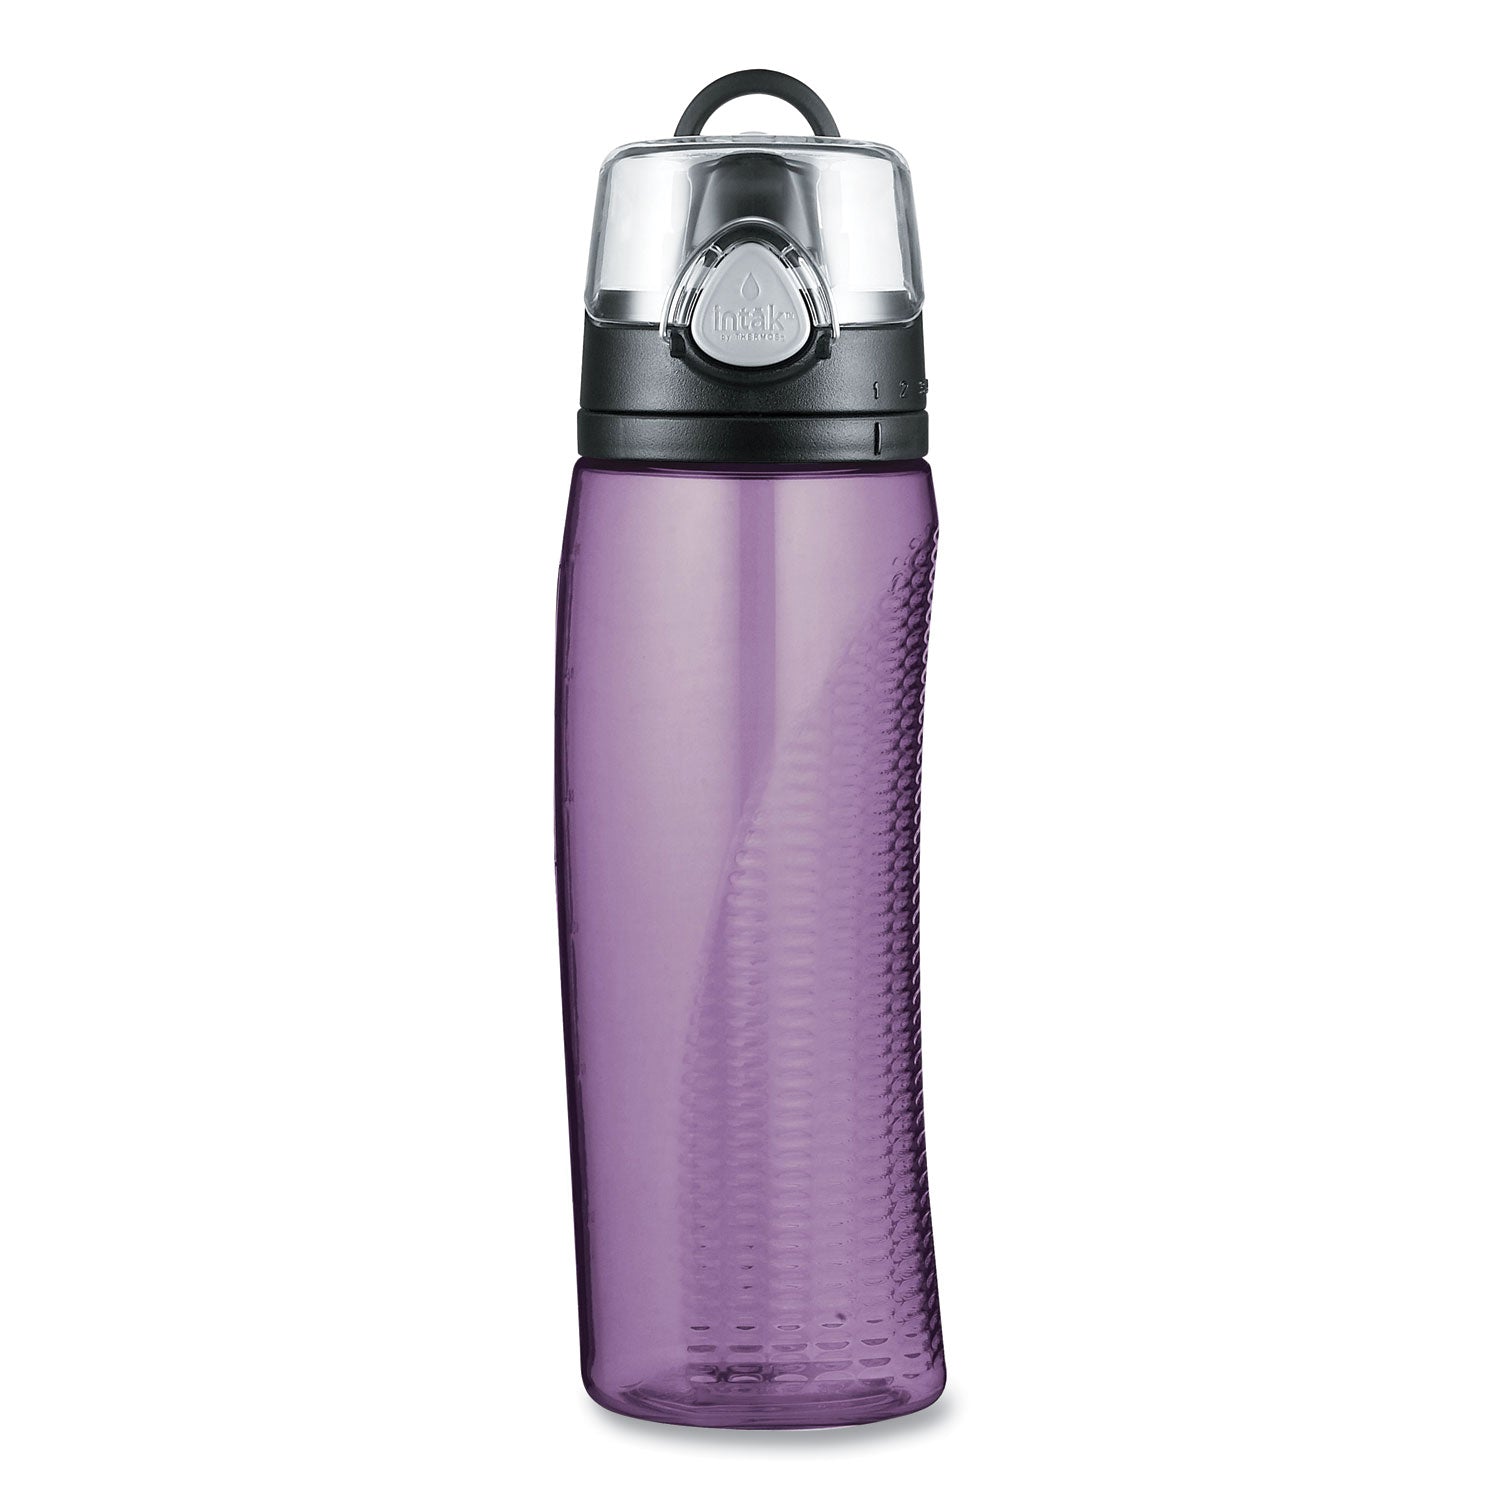 intak-by-thermos-hydration-bottle-with-meter-24-oz-purple-polyester_thzhp4100pu6 - 1